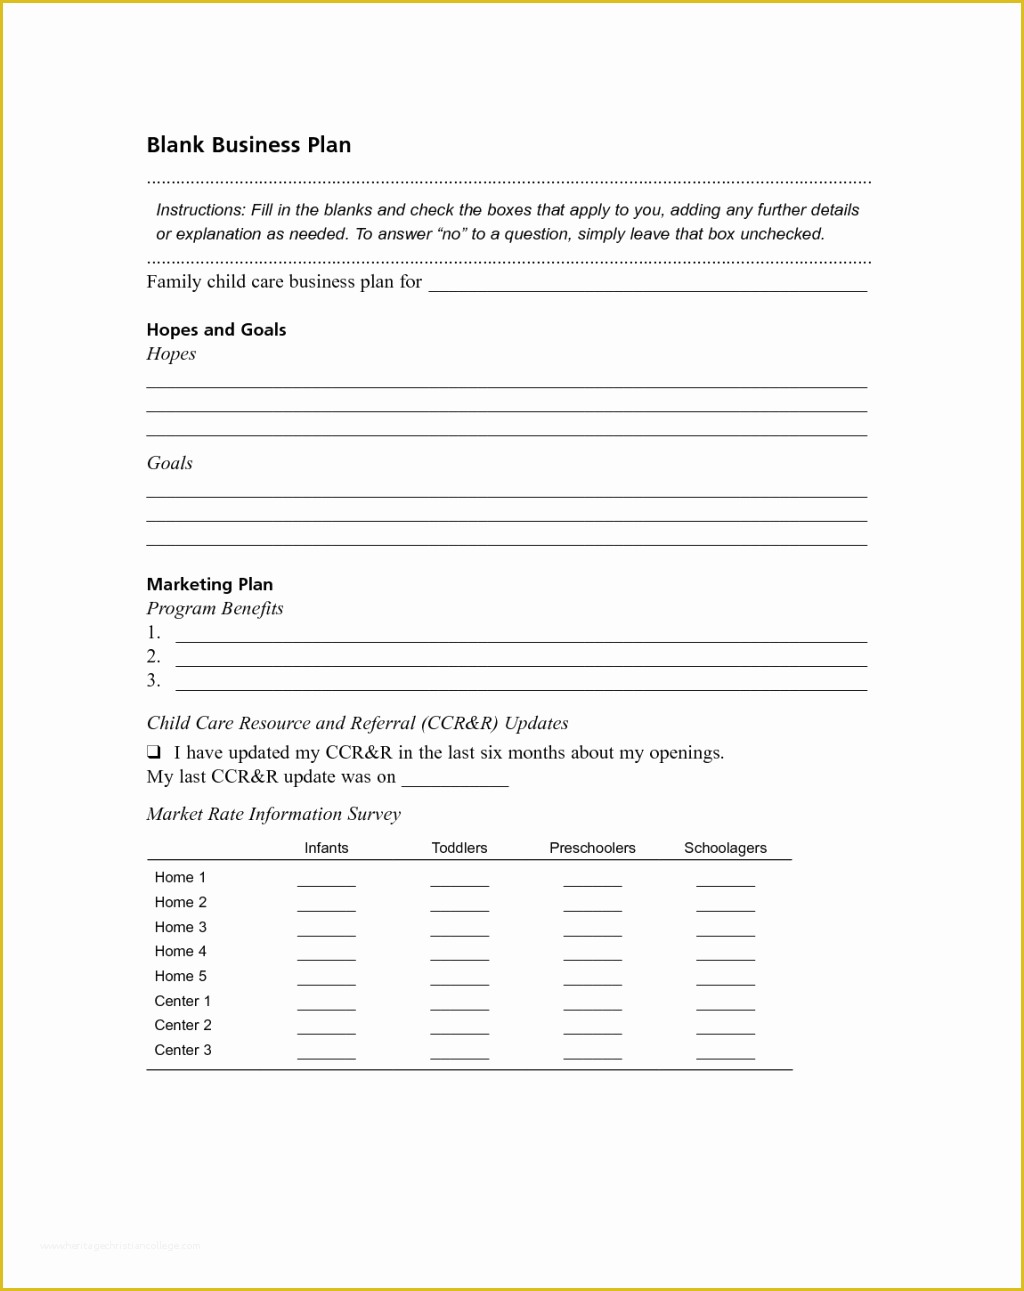 Fill In the Blank Business Plan Template Free Of Blank Business Plan Template Choice Image Business Cards